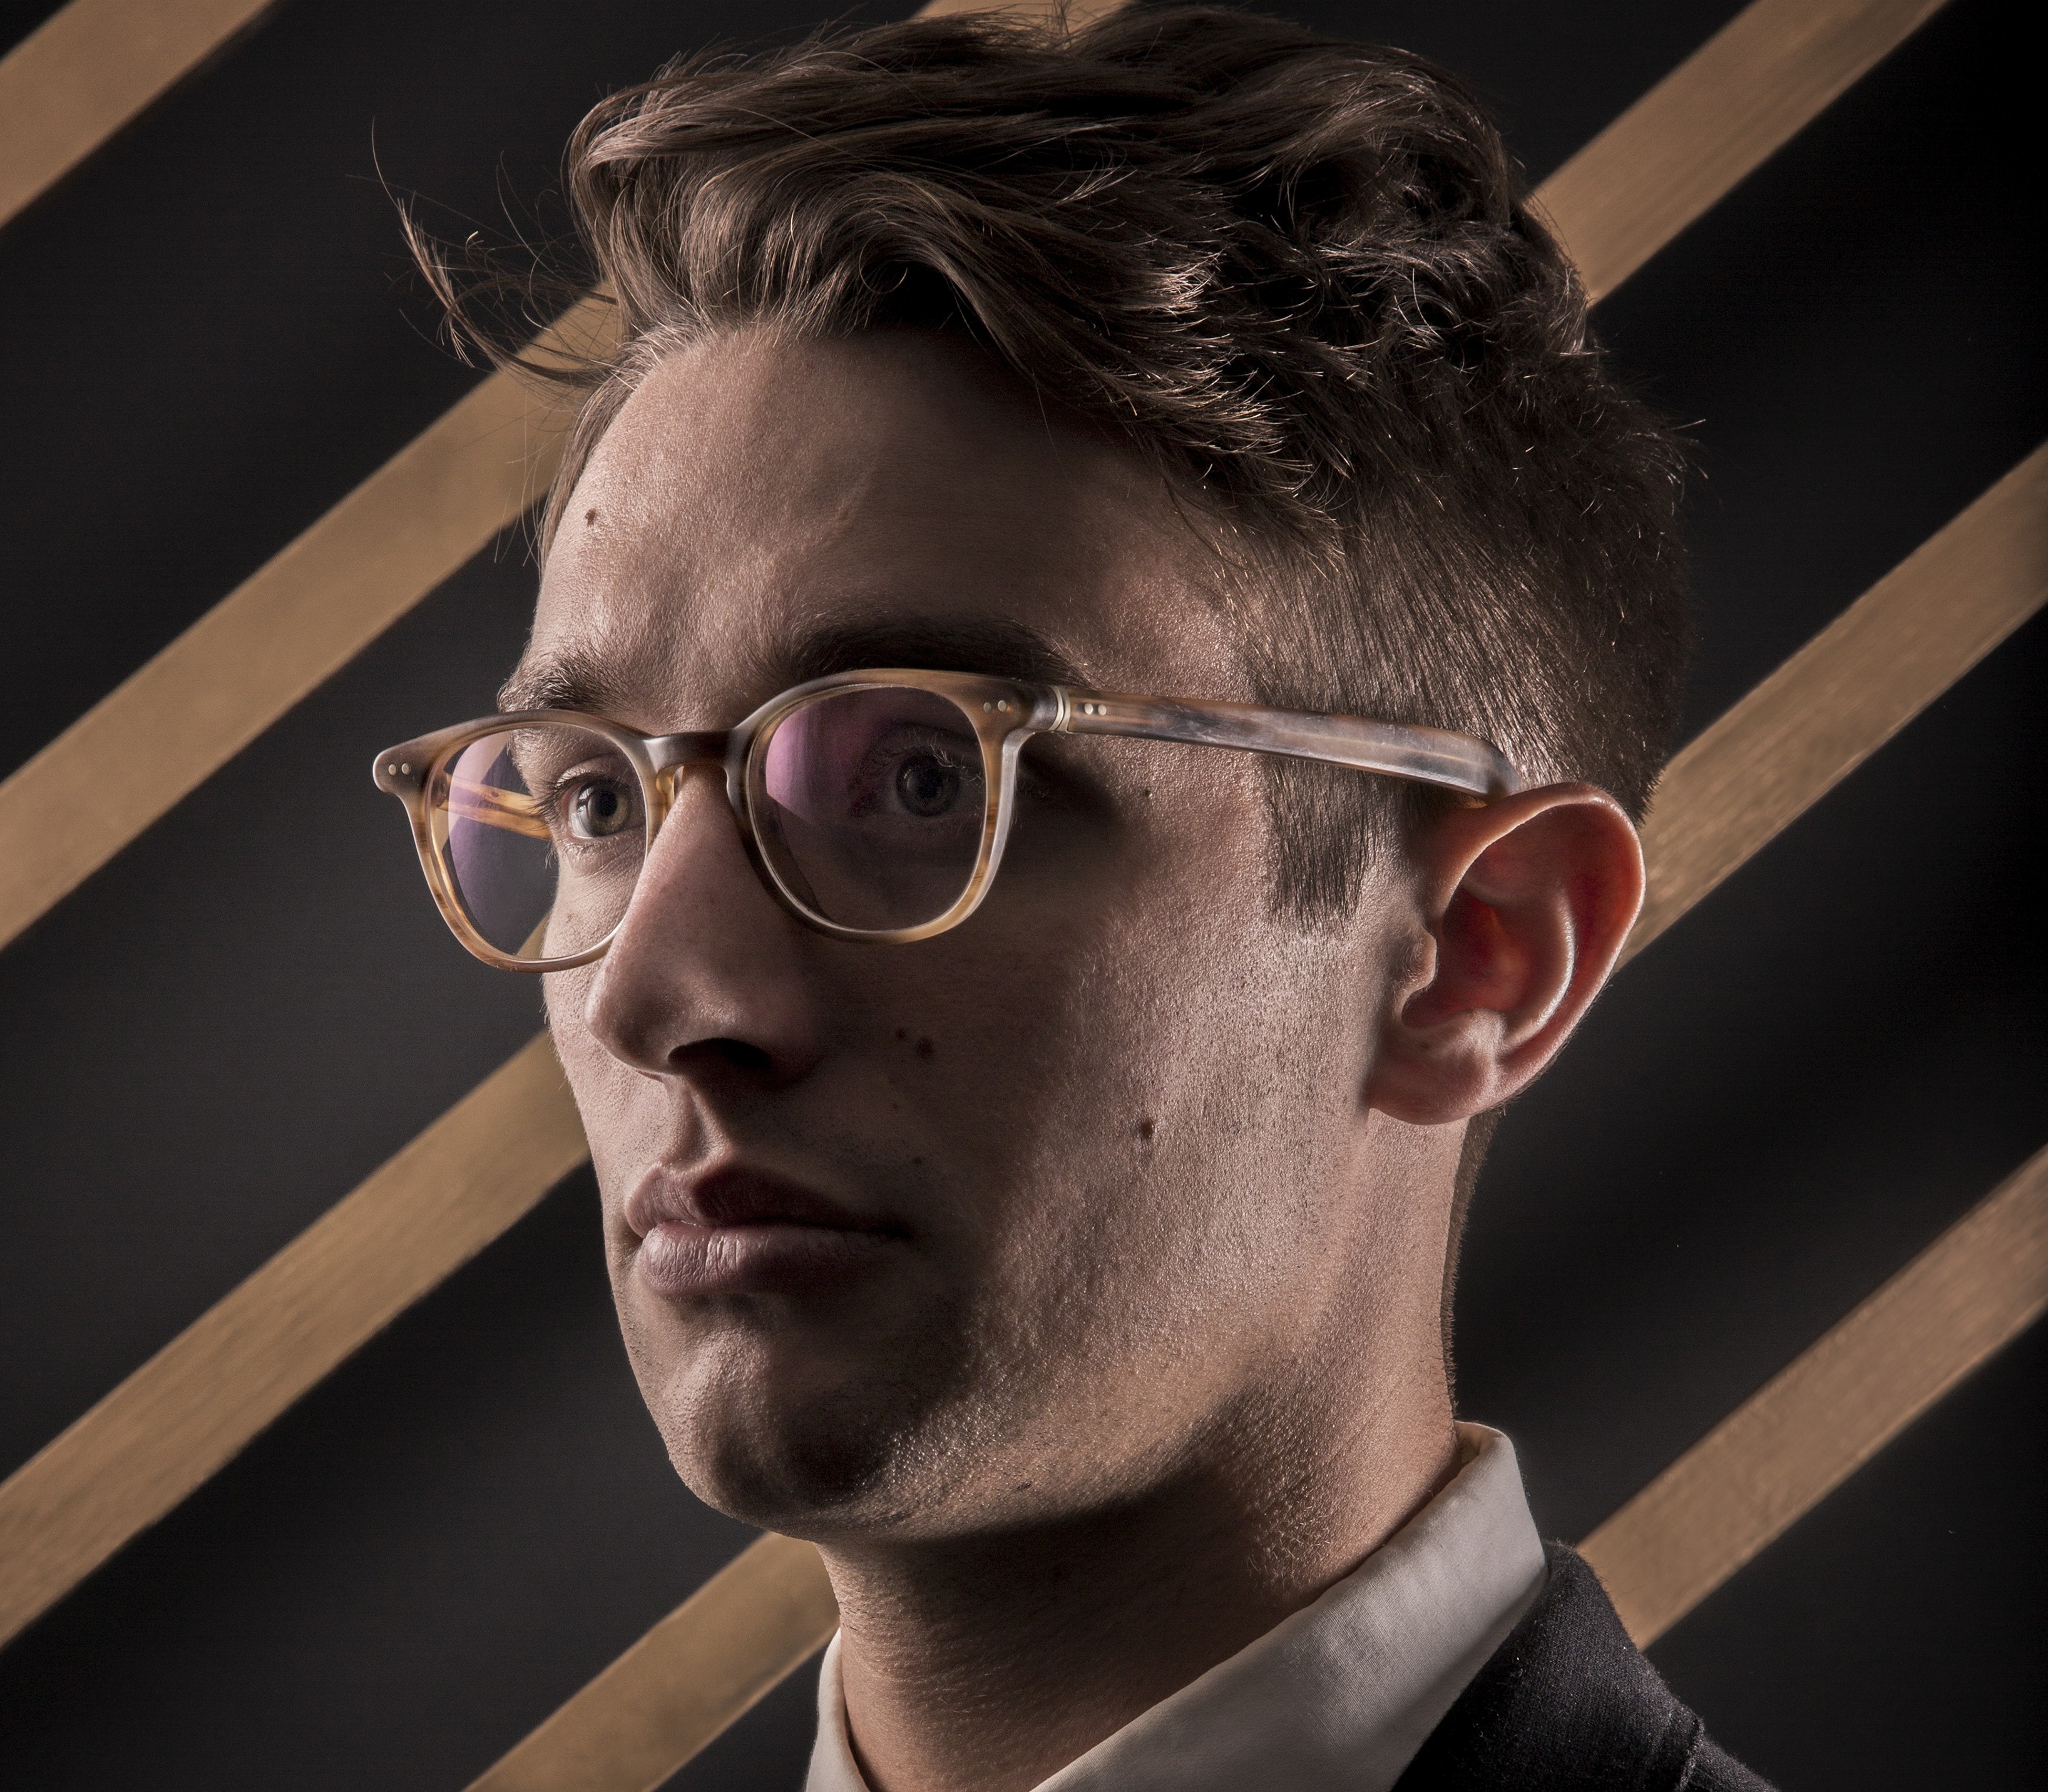 San Fermin release single "No Devil" and deluxe version of their LP 'Jackrabbit', now out on Downtown/Fontana North.